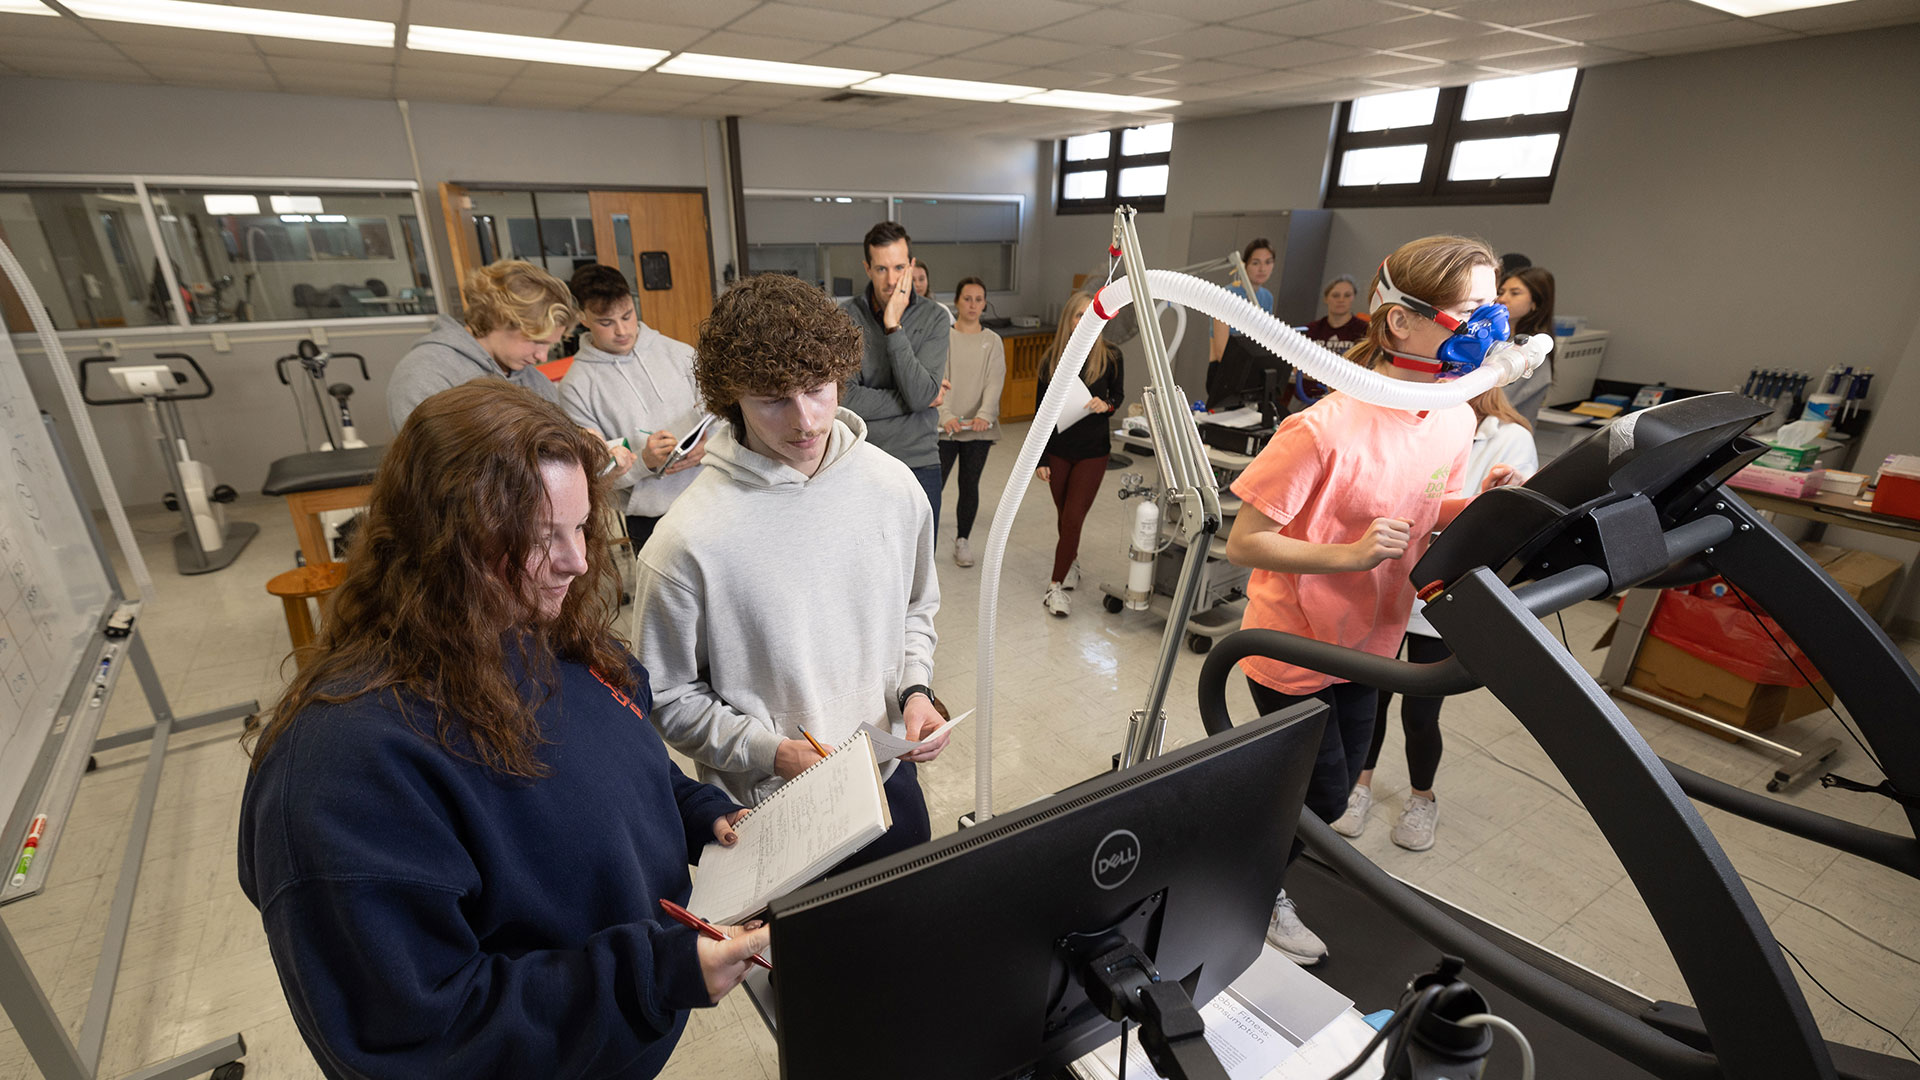 A kinesiology student keeps pace on a treadmill during a VO2 max test as two other students monitor her activity on a computer. The rest of the class discuss their notes and watch nearby.